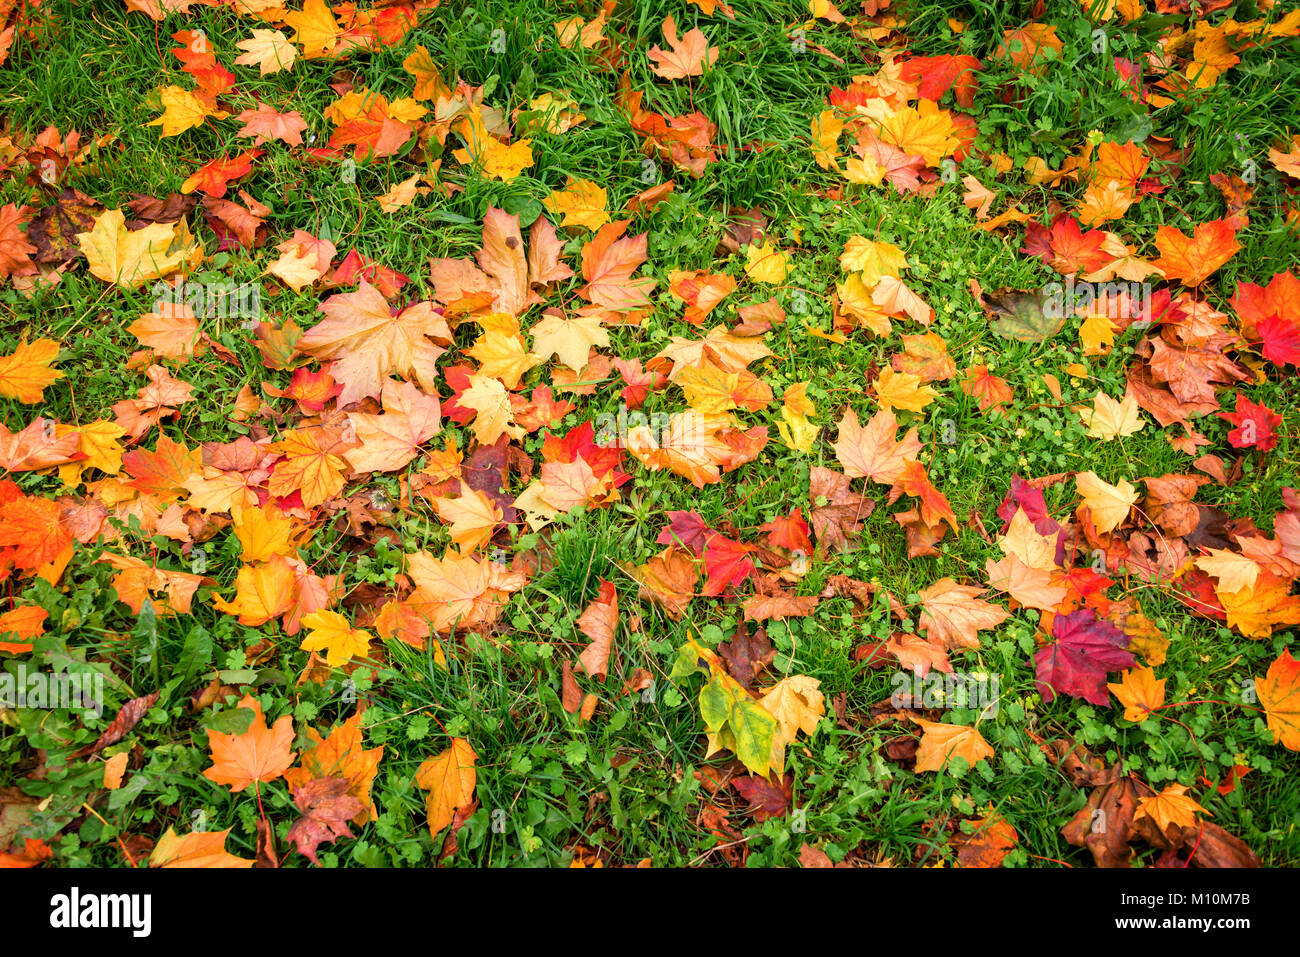 Background of colorful autumnal leaves in the grass Stock Photo